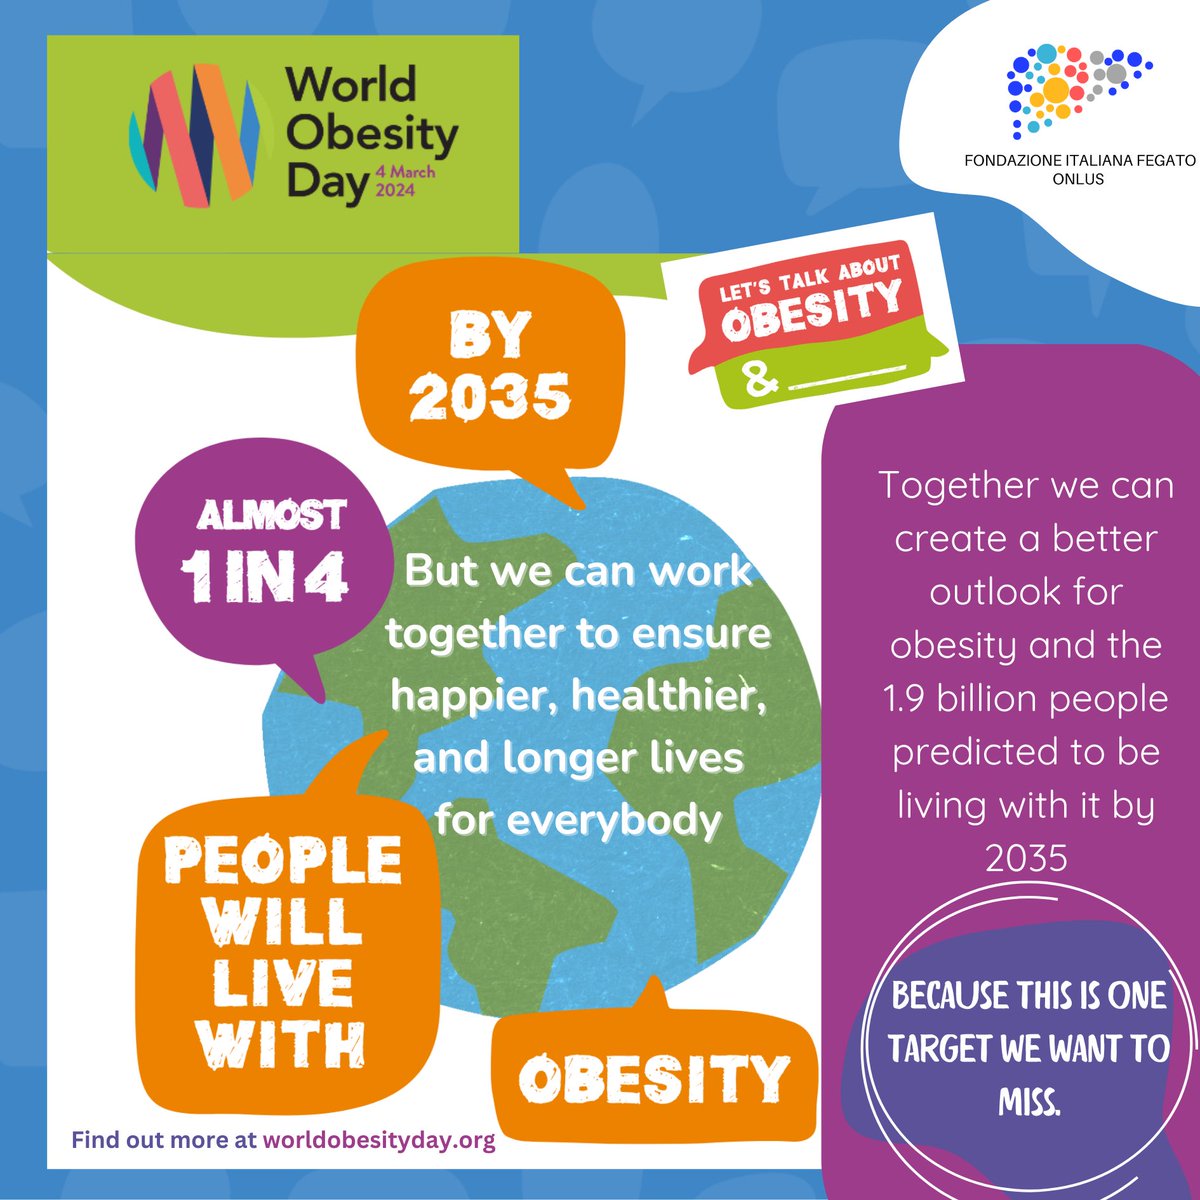 Together we can create a better outlook for obesity and the 1.9 billion people predicted to be living with it by 2035. Because this is one target we want to miss.#WorldObesityDay #ObesityAwareness